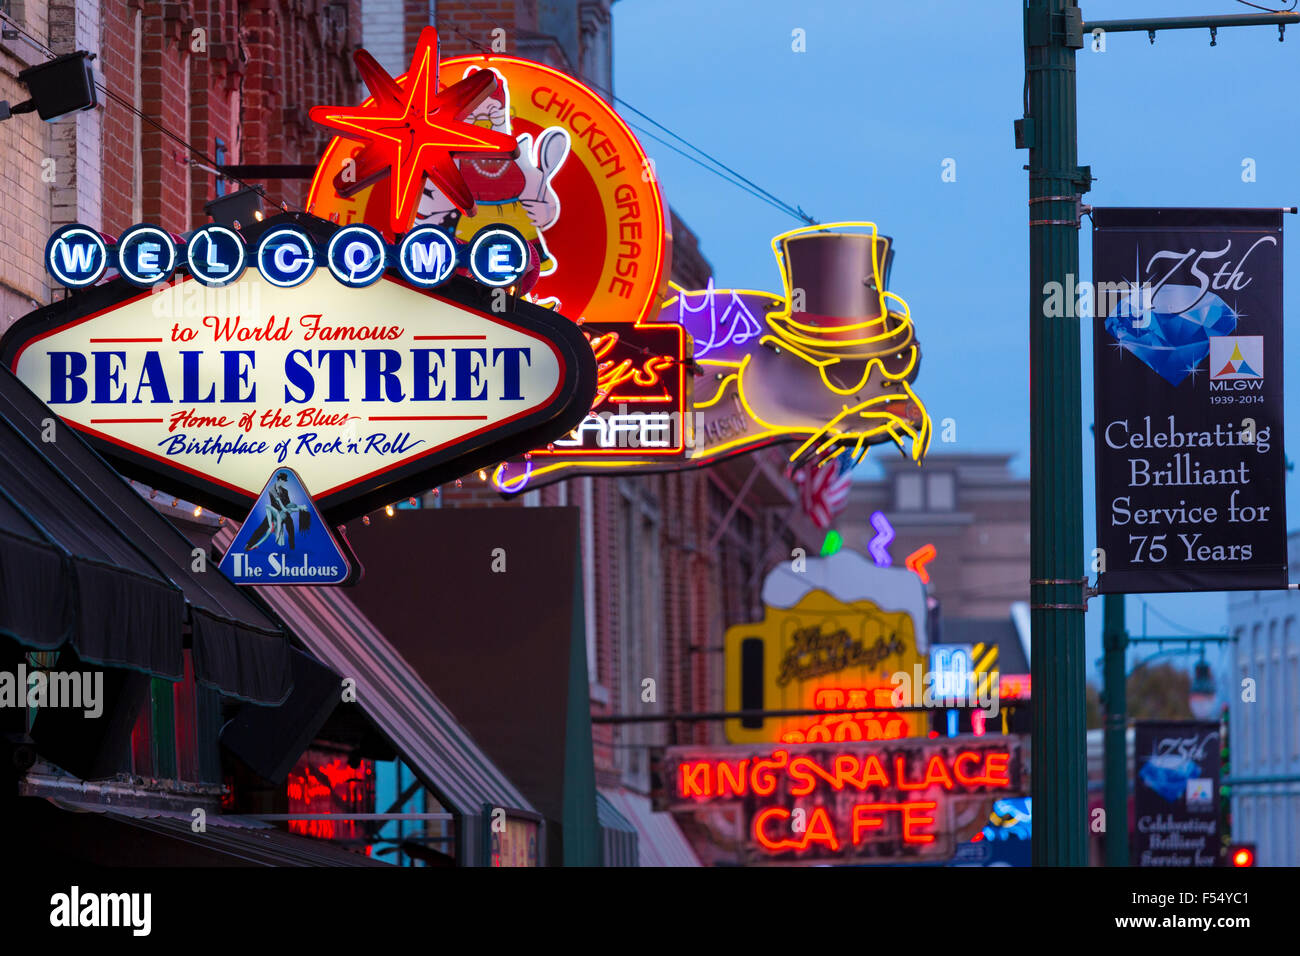 Diners, music venues in legendary Beale Street entertainment district famous for Rock and Roll and Blues, Memphis, Tennessee USA Stock Photo